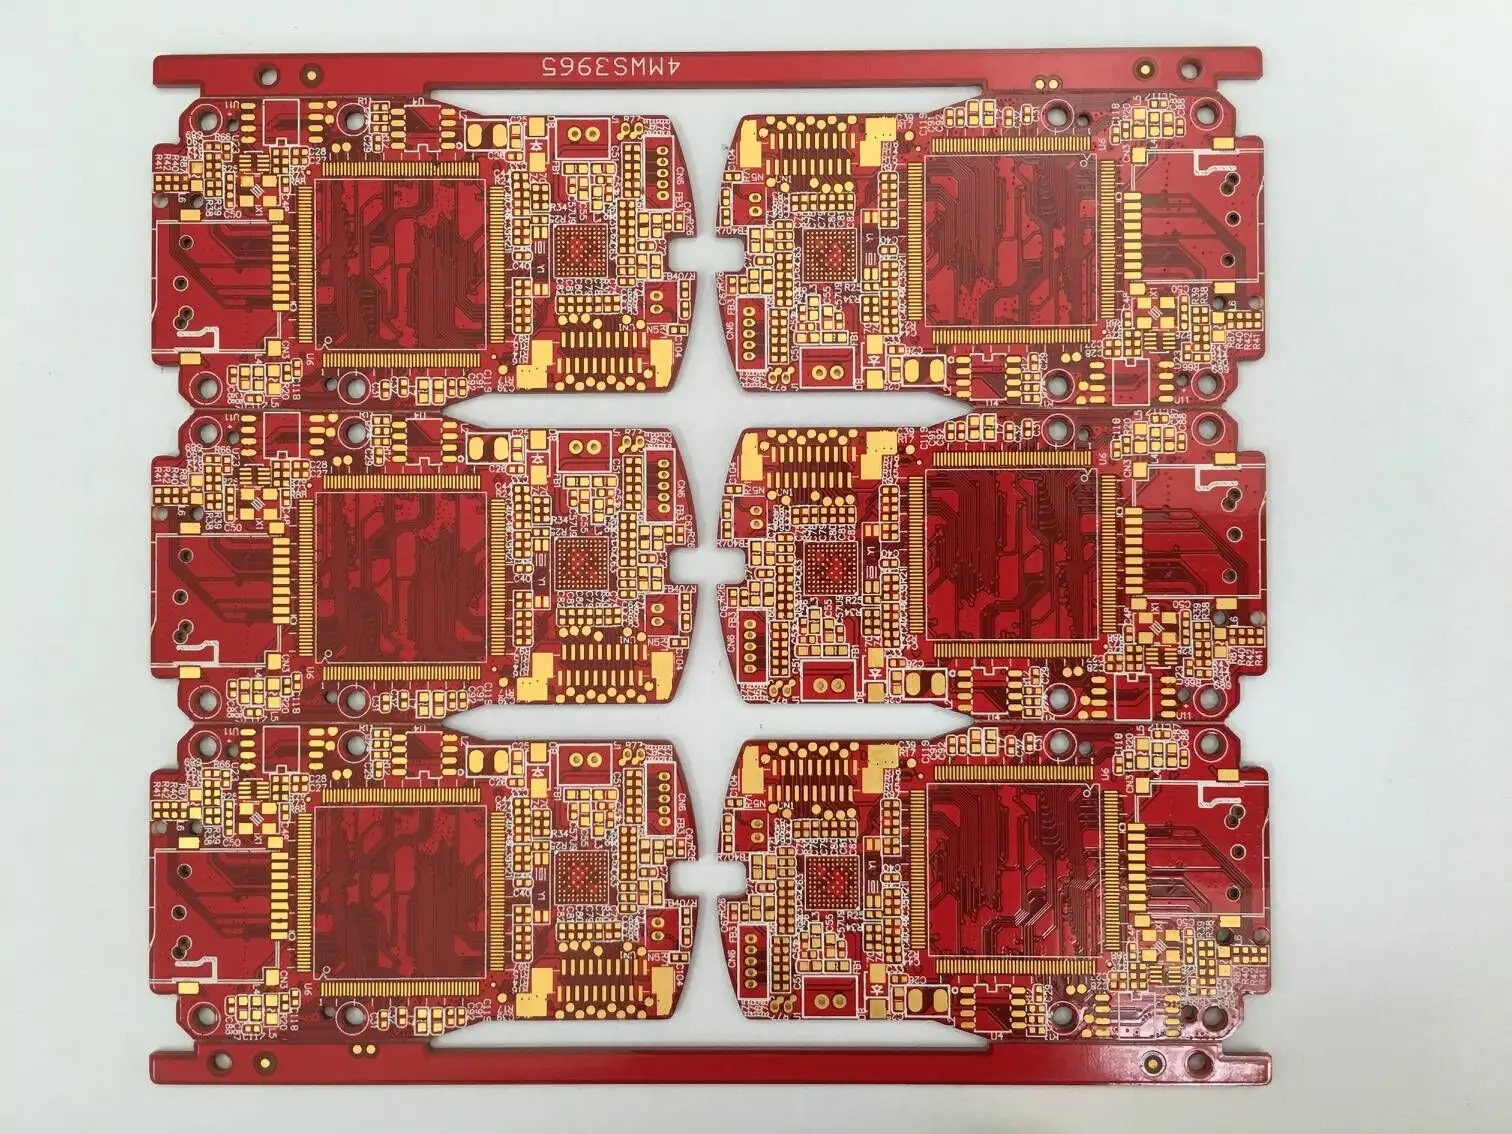 Detailed introduction to the structure and function of PCB